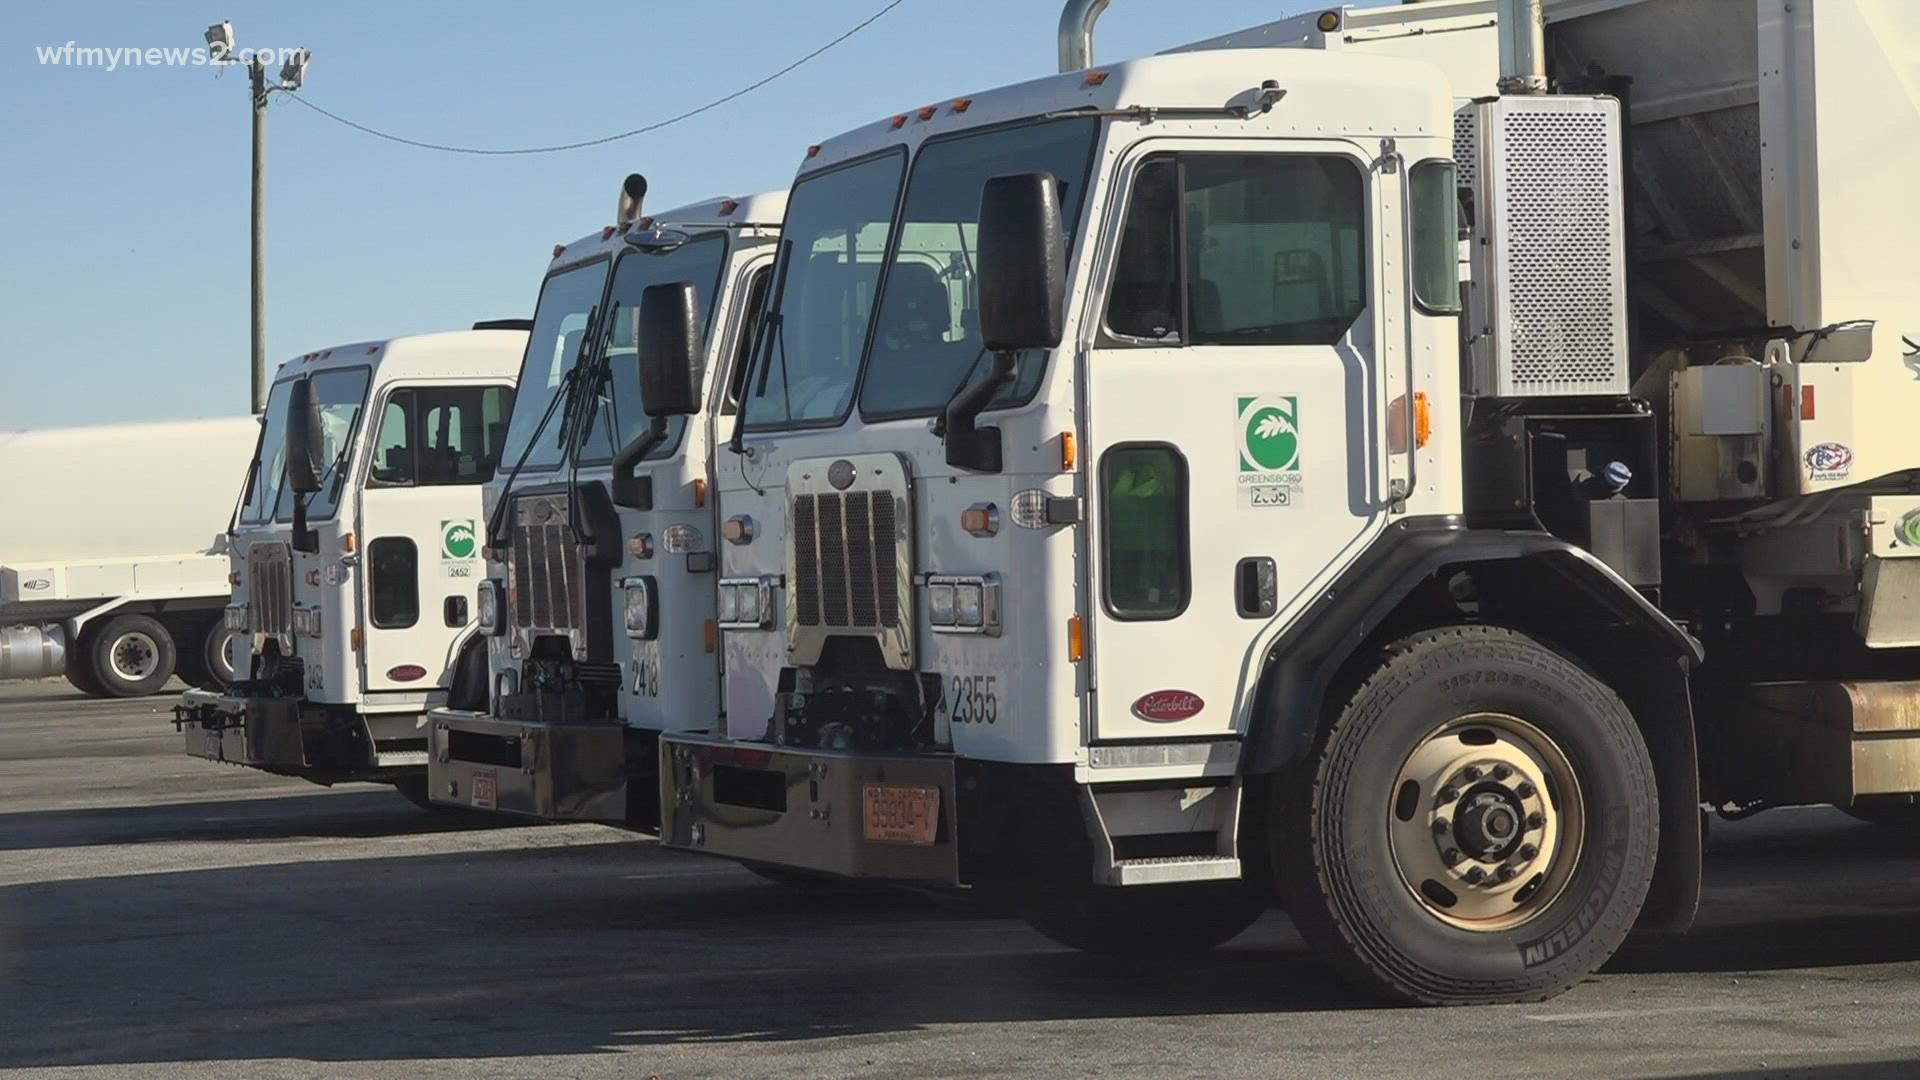 The city of Greensboro is experiencing solid waste driver shortages due to COVID-19.